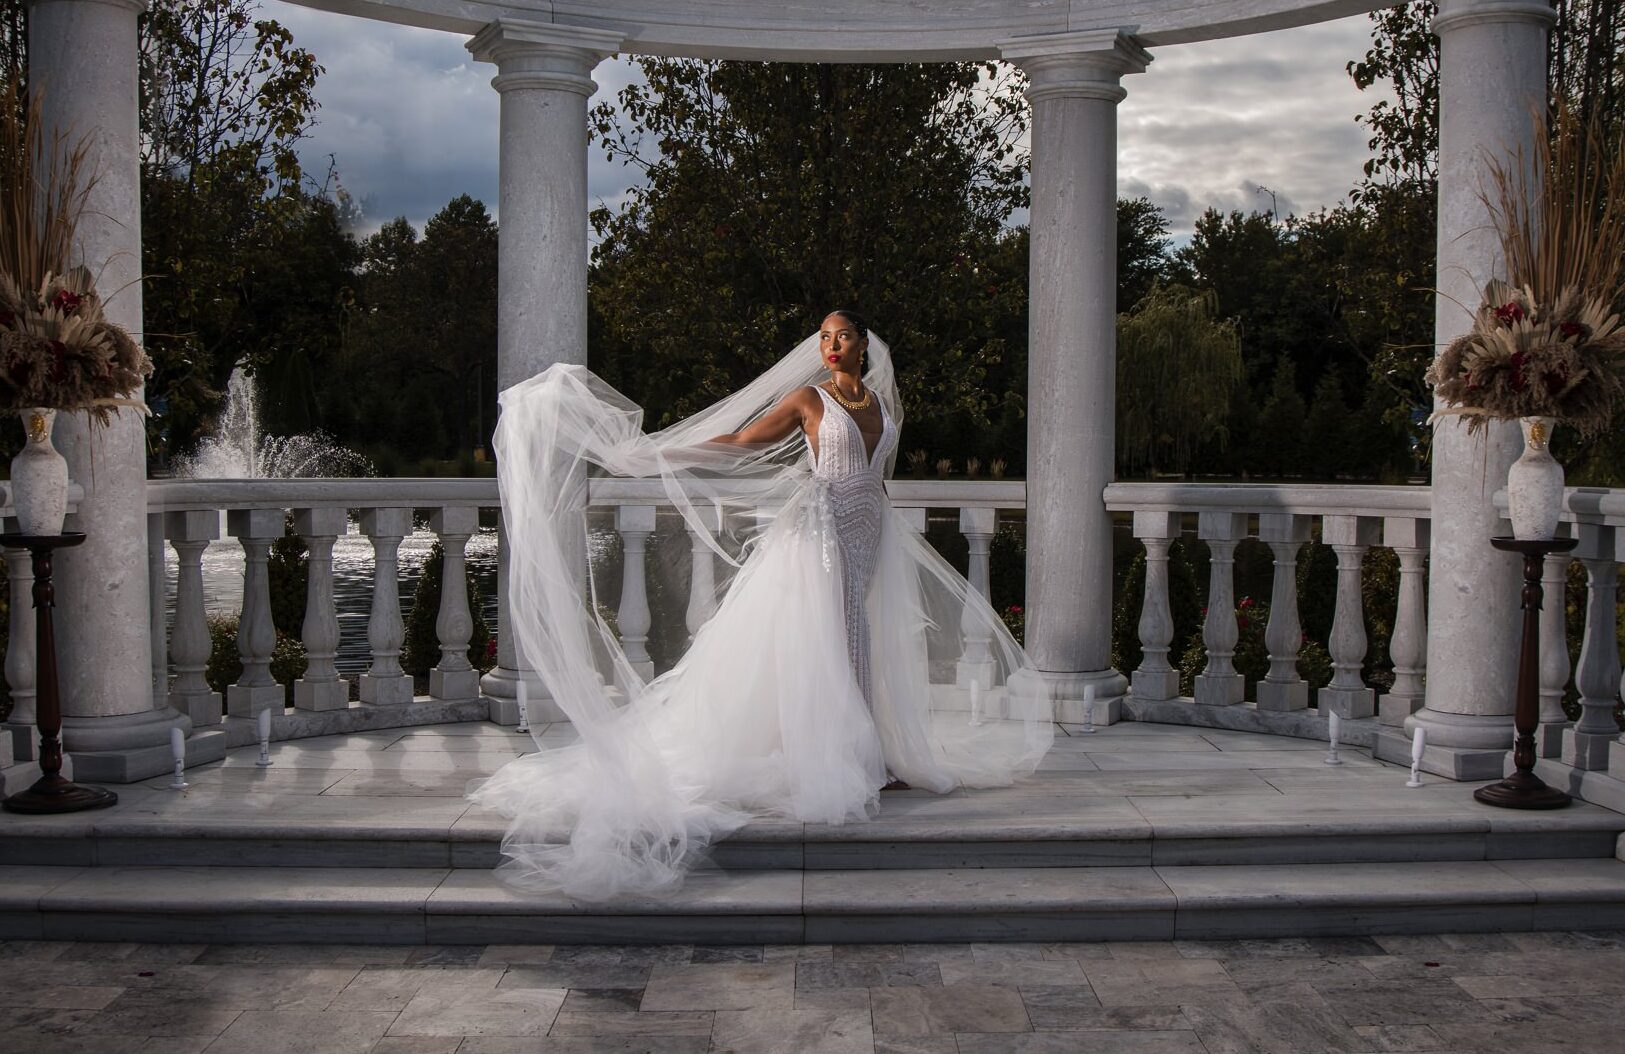 A bride stands under a neoclassical rotunda with columns at The Mansion on Main Street, her veil flowing, surrounded by decorative urns and trees against a cloudy sky.